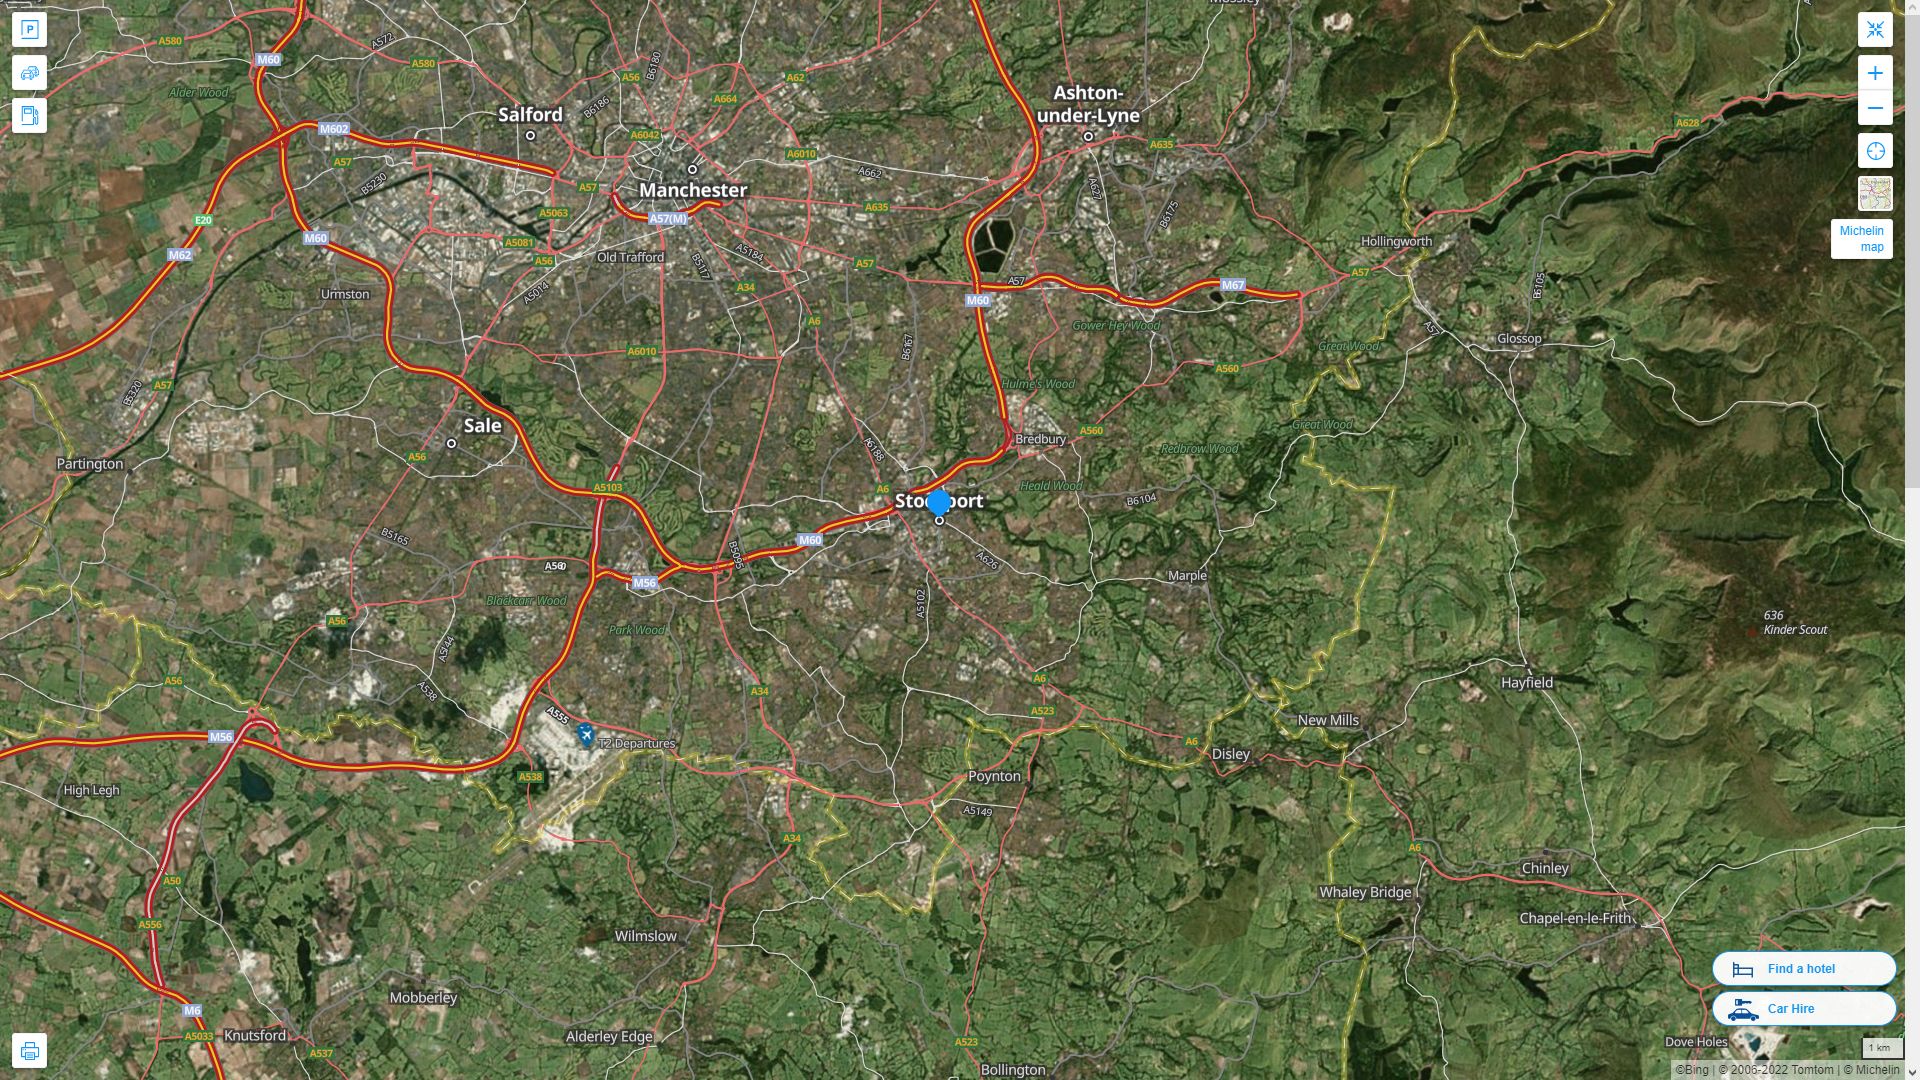 Stockport Highway and Road Map with Satellite View